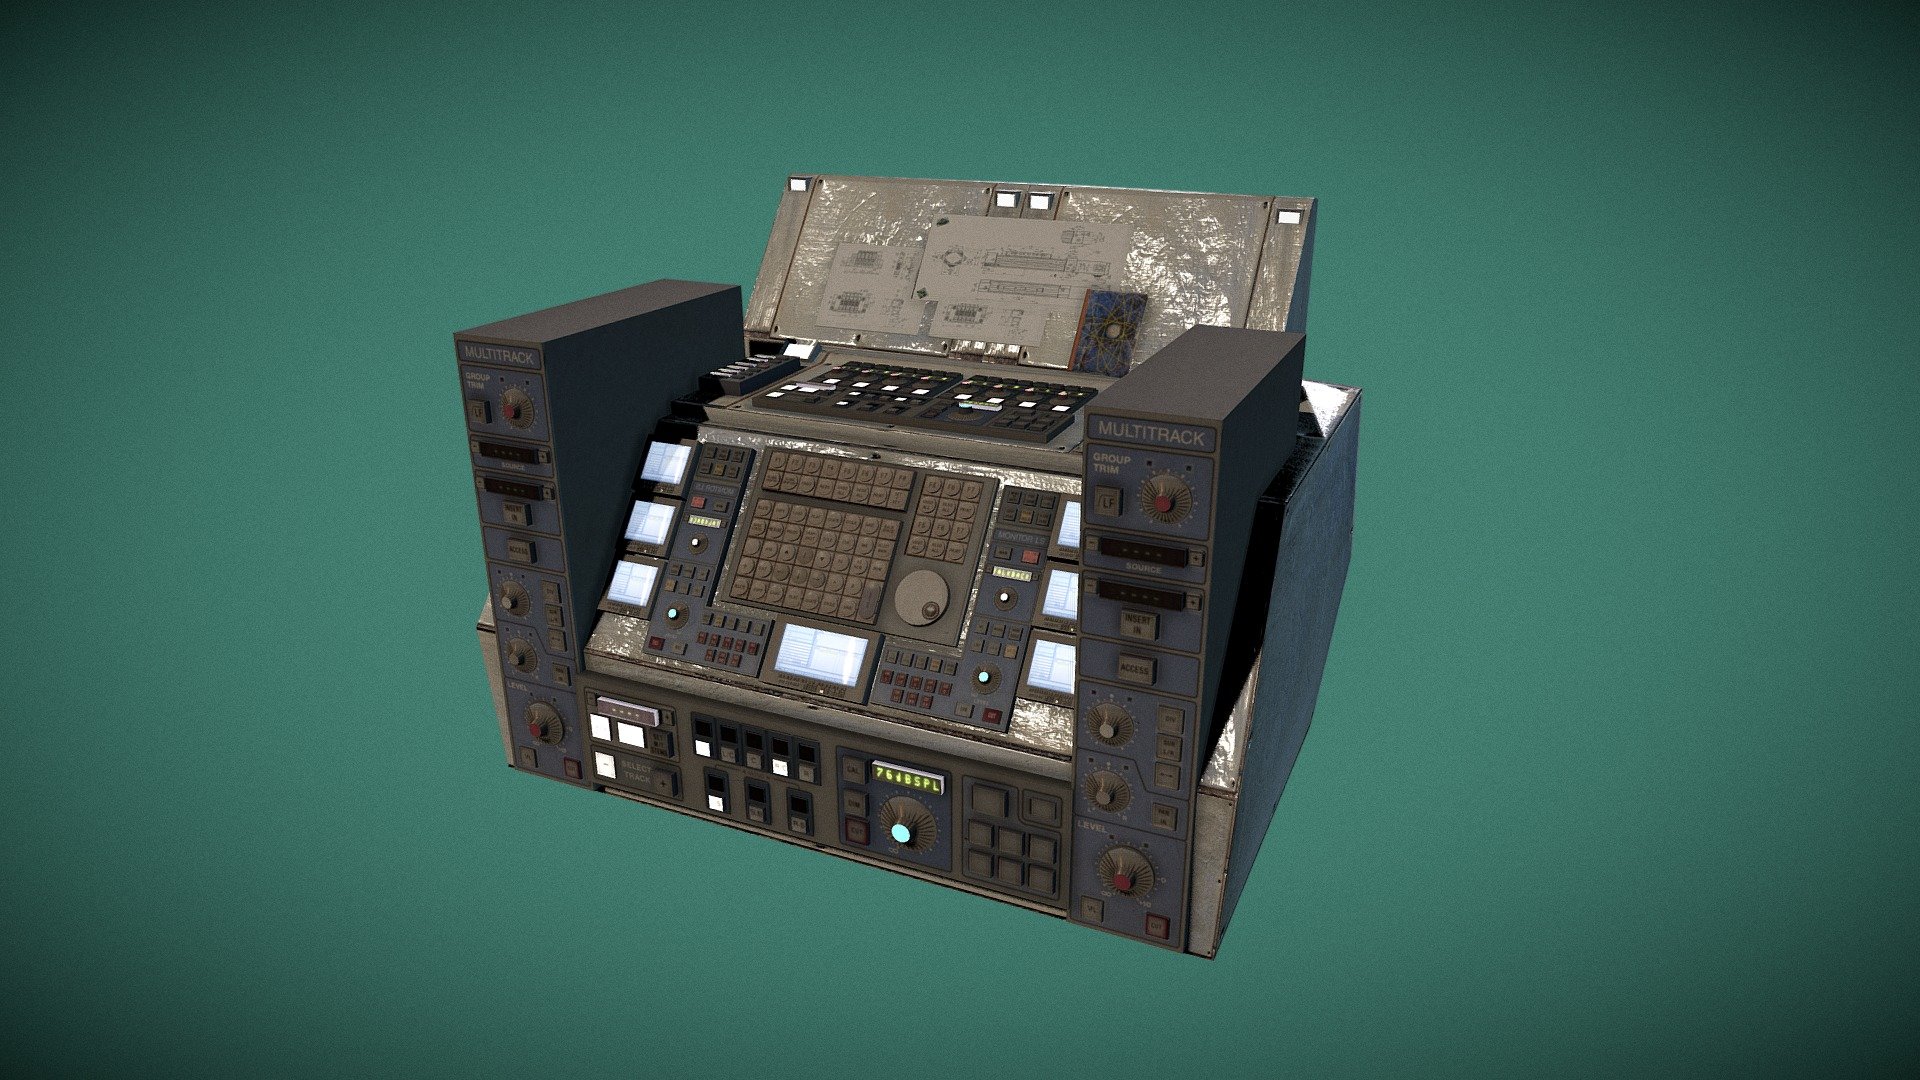 CheckCheckoutCheckCheckoutthisCheckCheckoutCheckCheckoutthissiteforfree4KKtextures
https://freecg.weebly.com

Computer Retro Super Machine PBR Electronics 
-Low Poly 
-4k Textures 
-UV Unwrapped NON Overlapping 
-Aligned to 0/0/0 X,Y,Z 
-Uses 5 Textures includes Normal Map for Metal Material 
-PBR Game Ready Mobile - Desktop - Console 
Unlimited Support!

Modelled Rendered in Blender Cycles 2.76 - Retro Super Computer Terminal Interface - Buy Royalty Free 3D model by BehrtronStudios 3d model